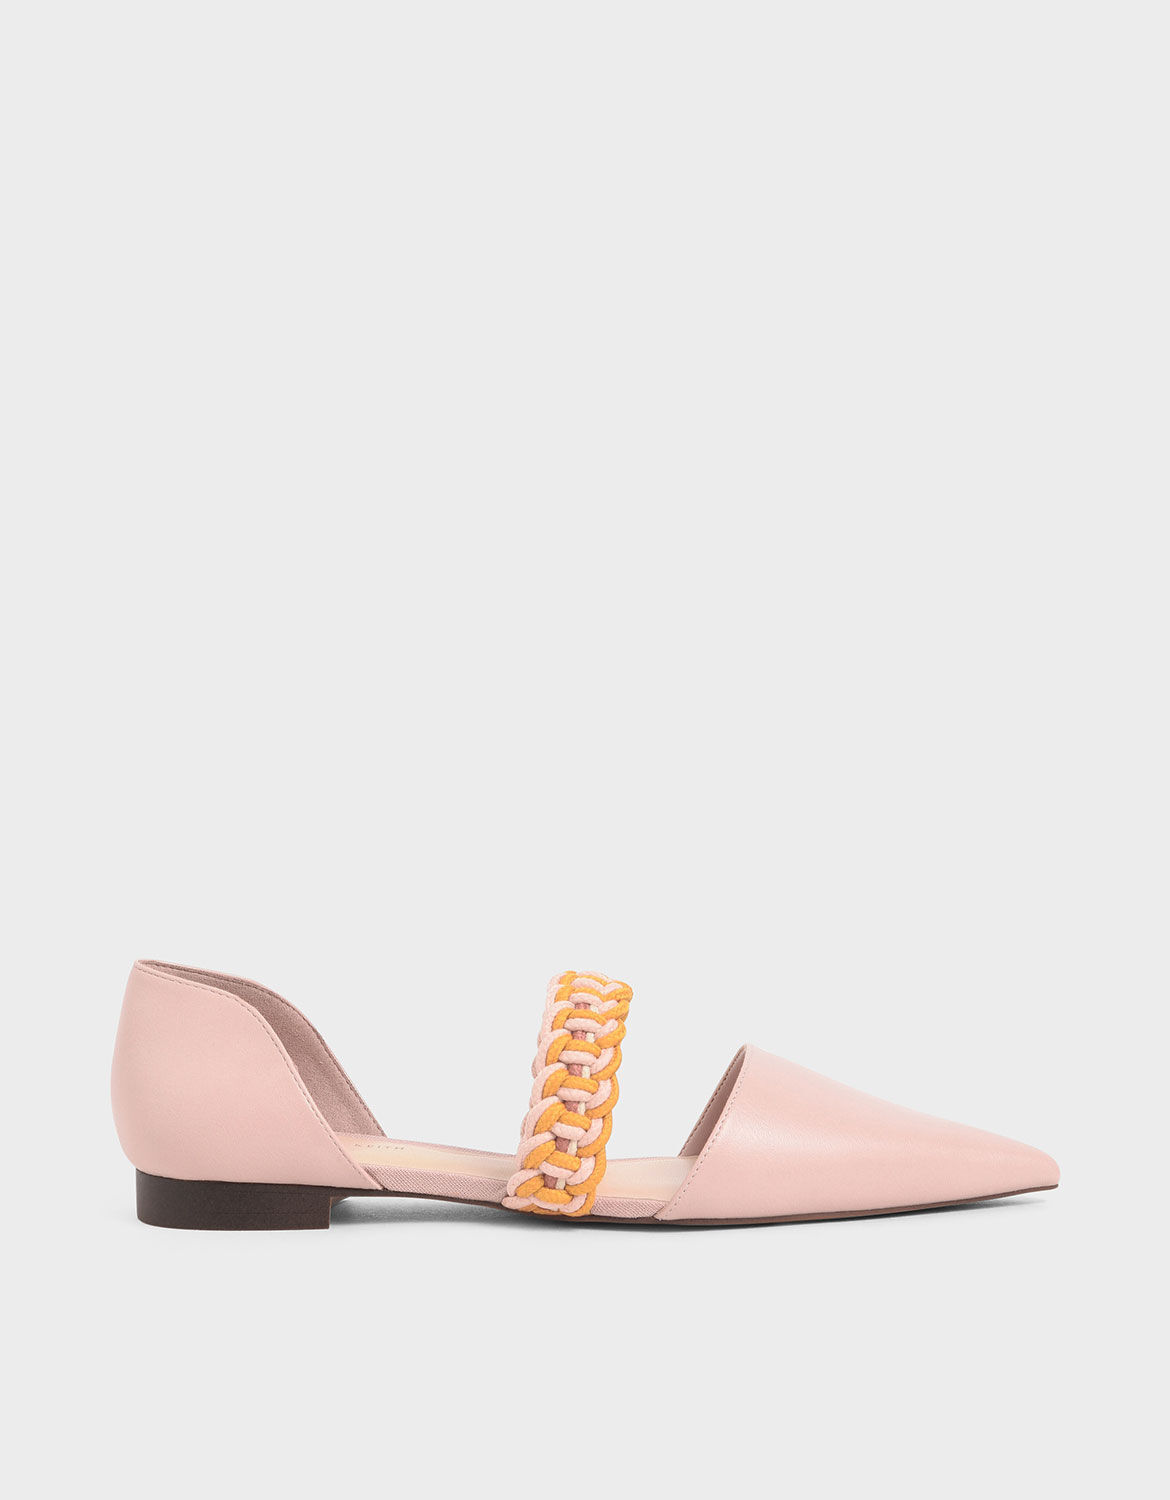 nude mary jane shoes